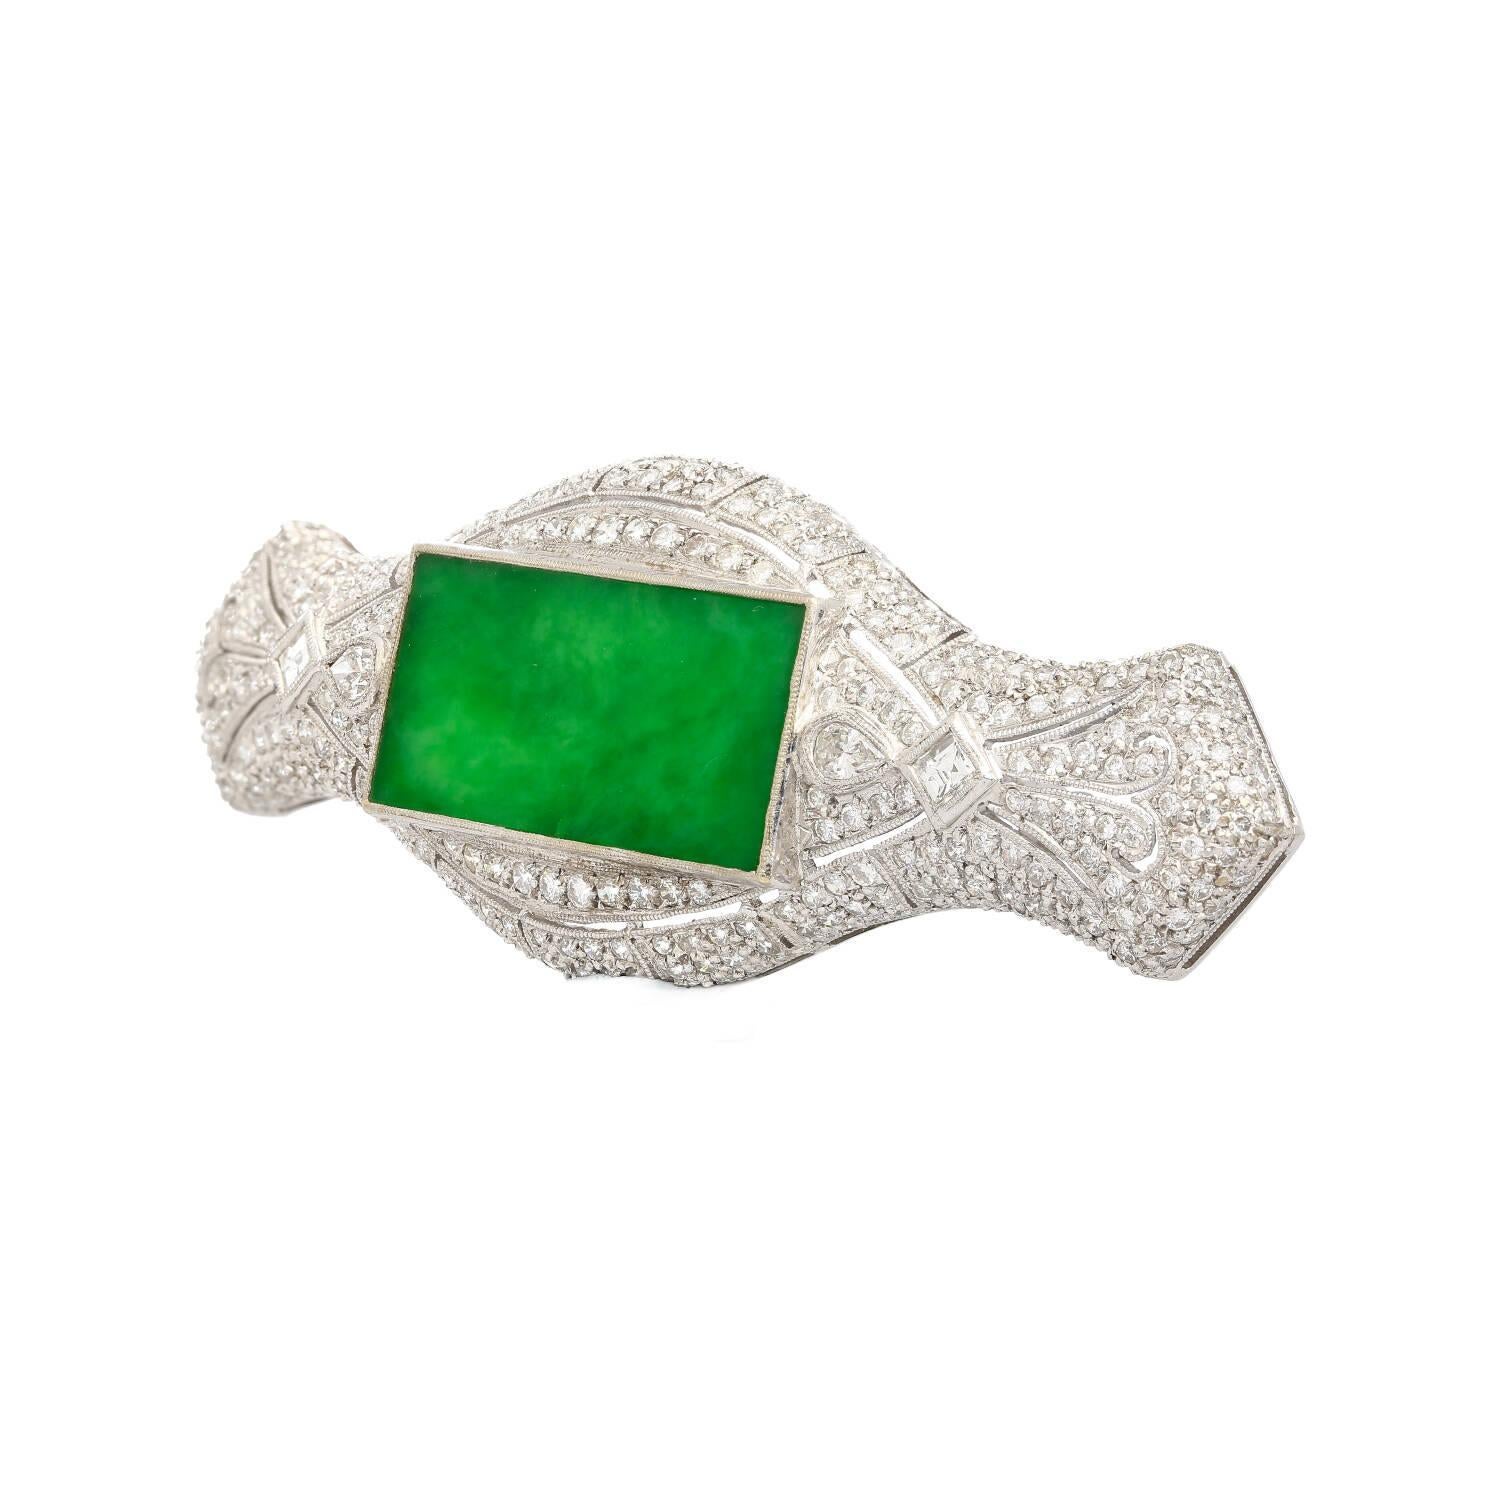 Jewelry Details:
Item Type: Brooch Pin
Metal Type: 18K White Gold
Weight: 16.9 grams
Length: 2.75 Inches

Center Stone Details:
Gemstone: Jadeite Jade
Dimensions: Approximately 2.5 x 6 cm

Side Stone Details:
Diamonds:2 Pear-Shaped Diamonds
2